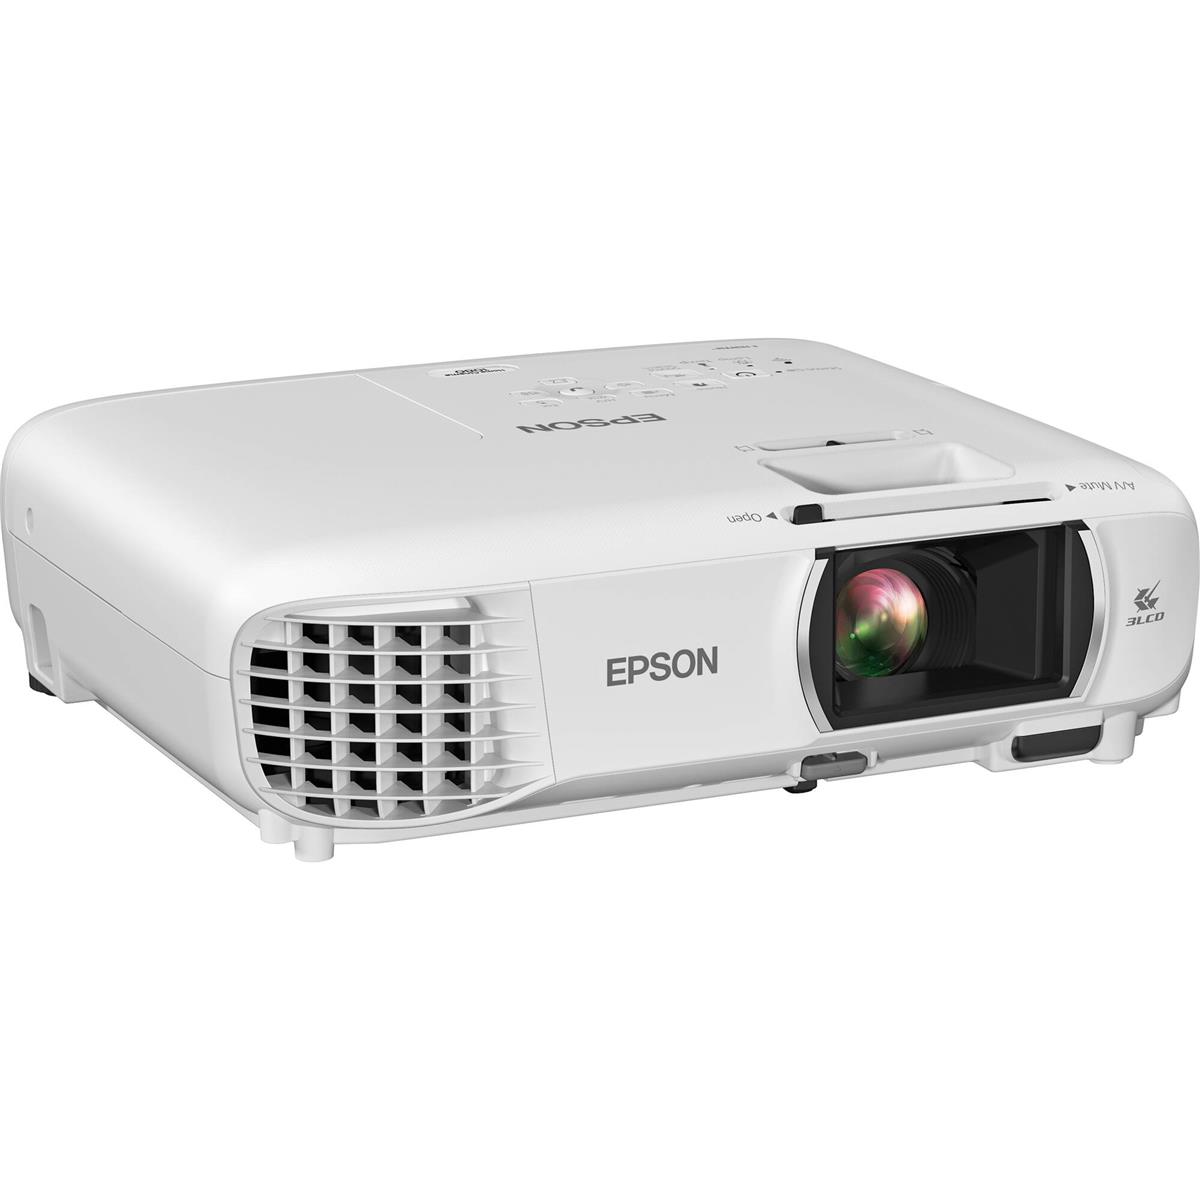 

Epson Home Cinema 1080 Full HD 3LCD Home Theater Projector, 3400 Lumens